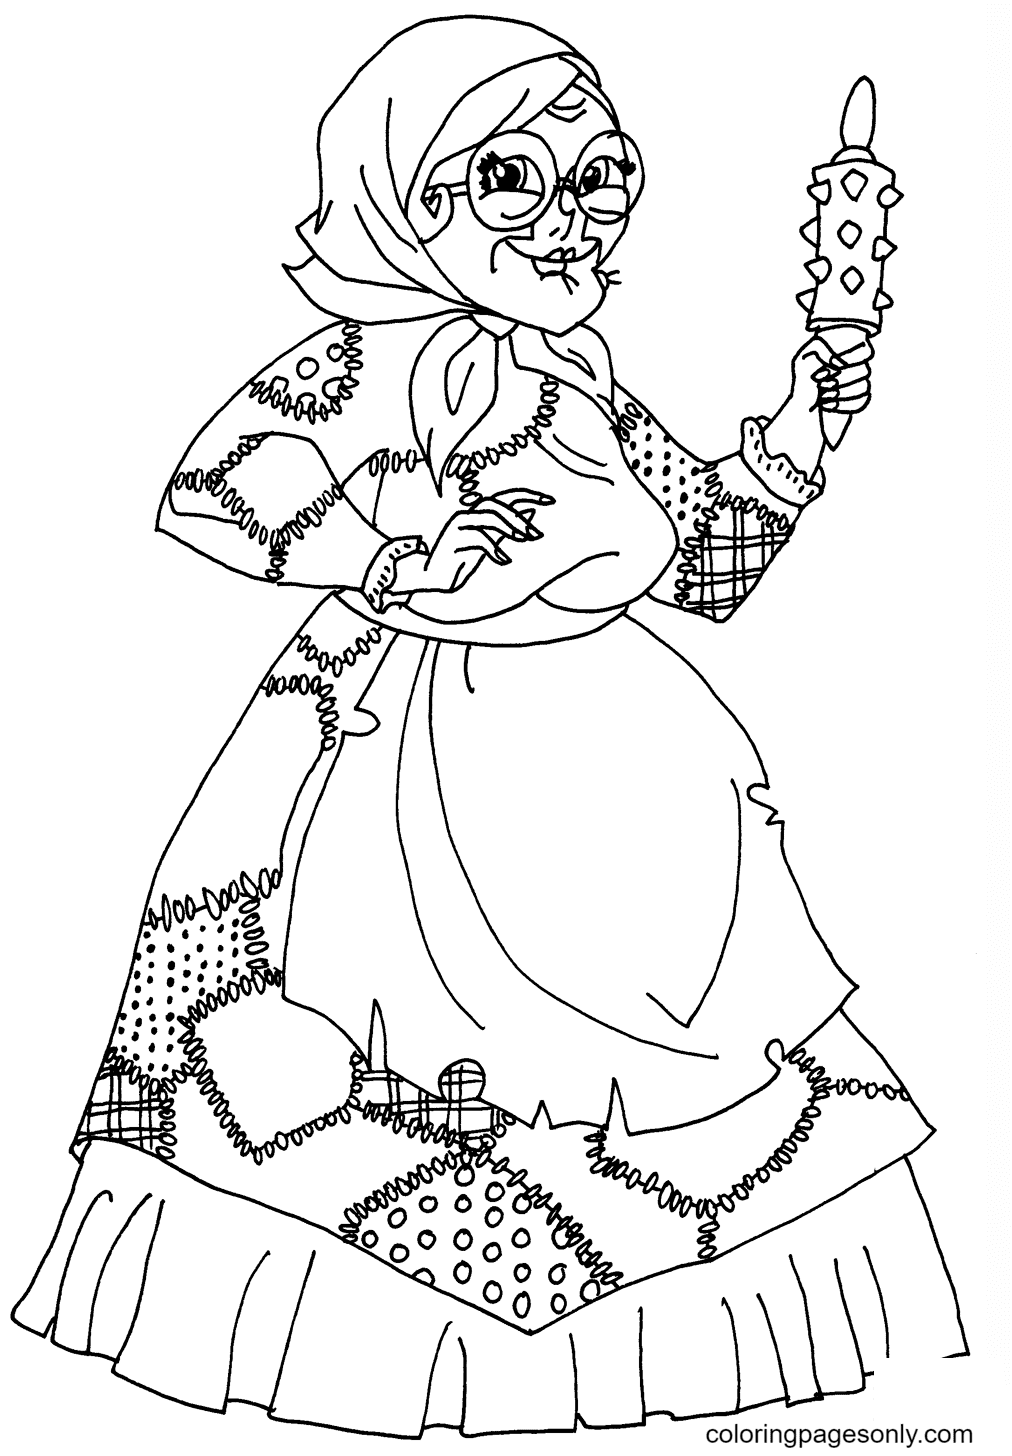 Ms Kindergrubber Coloring Page